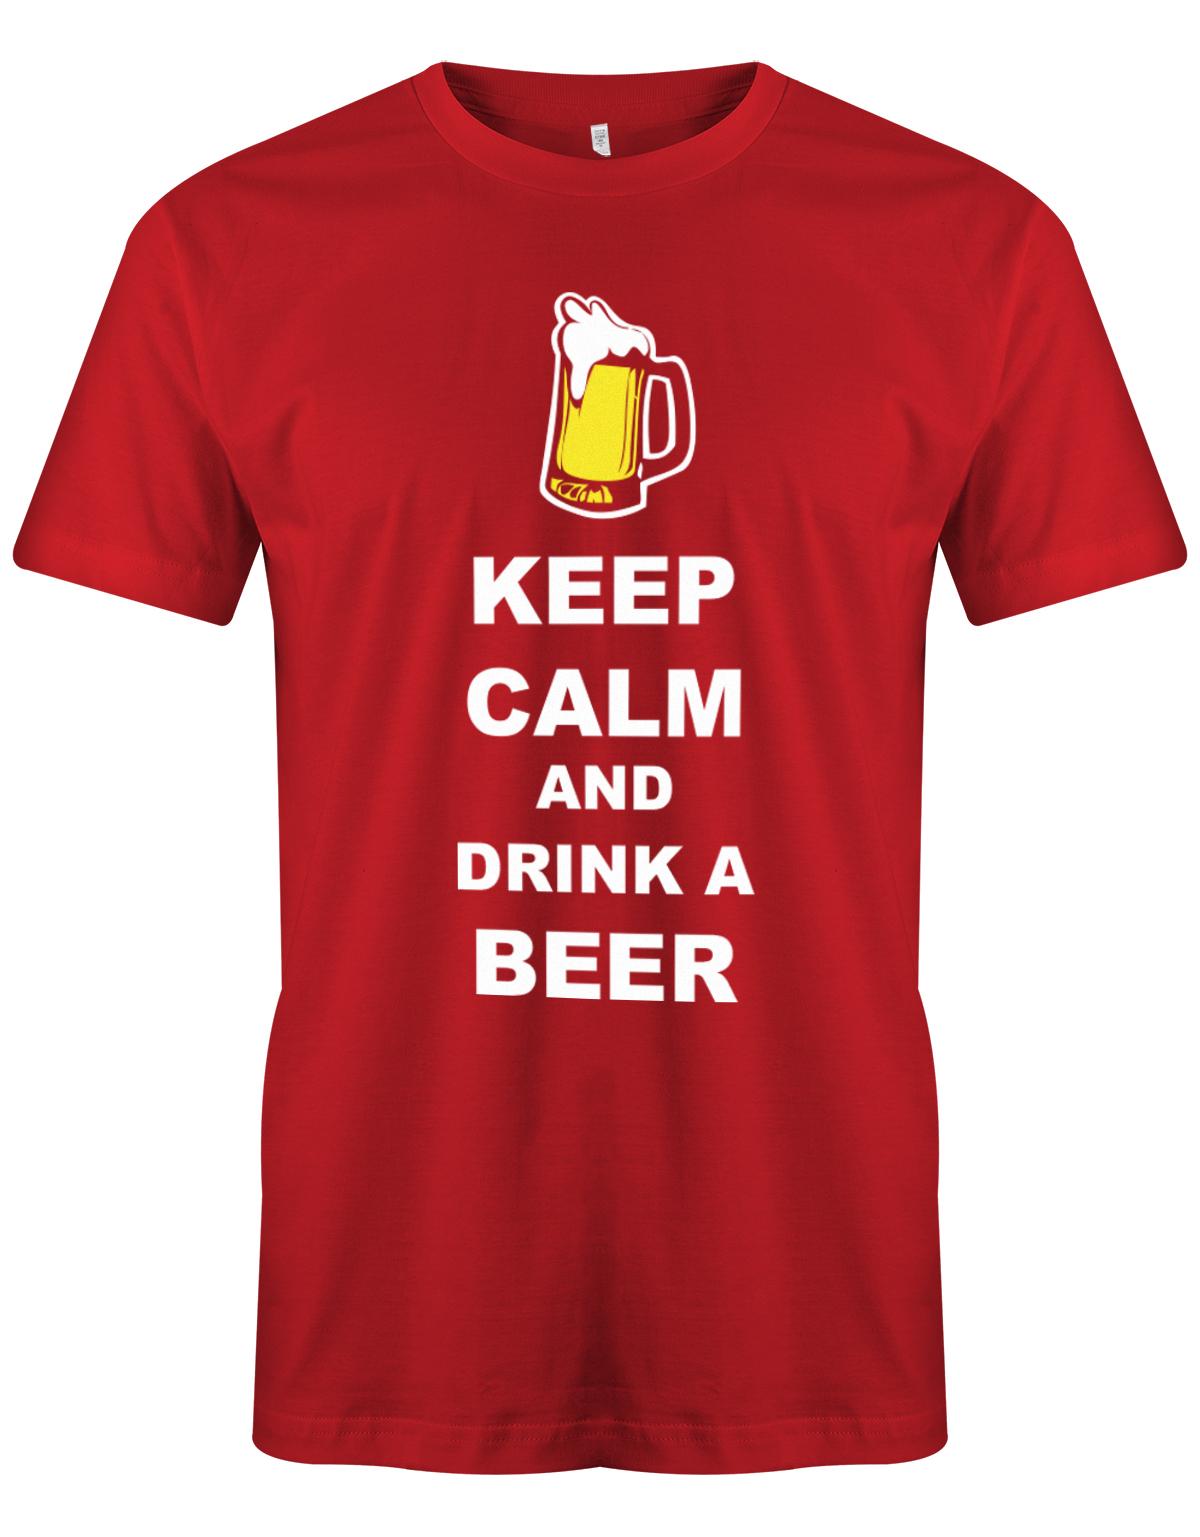 Keep-Calm-and-drink-a-beer-Herren-Shirt-Rot